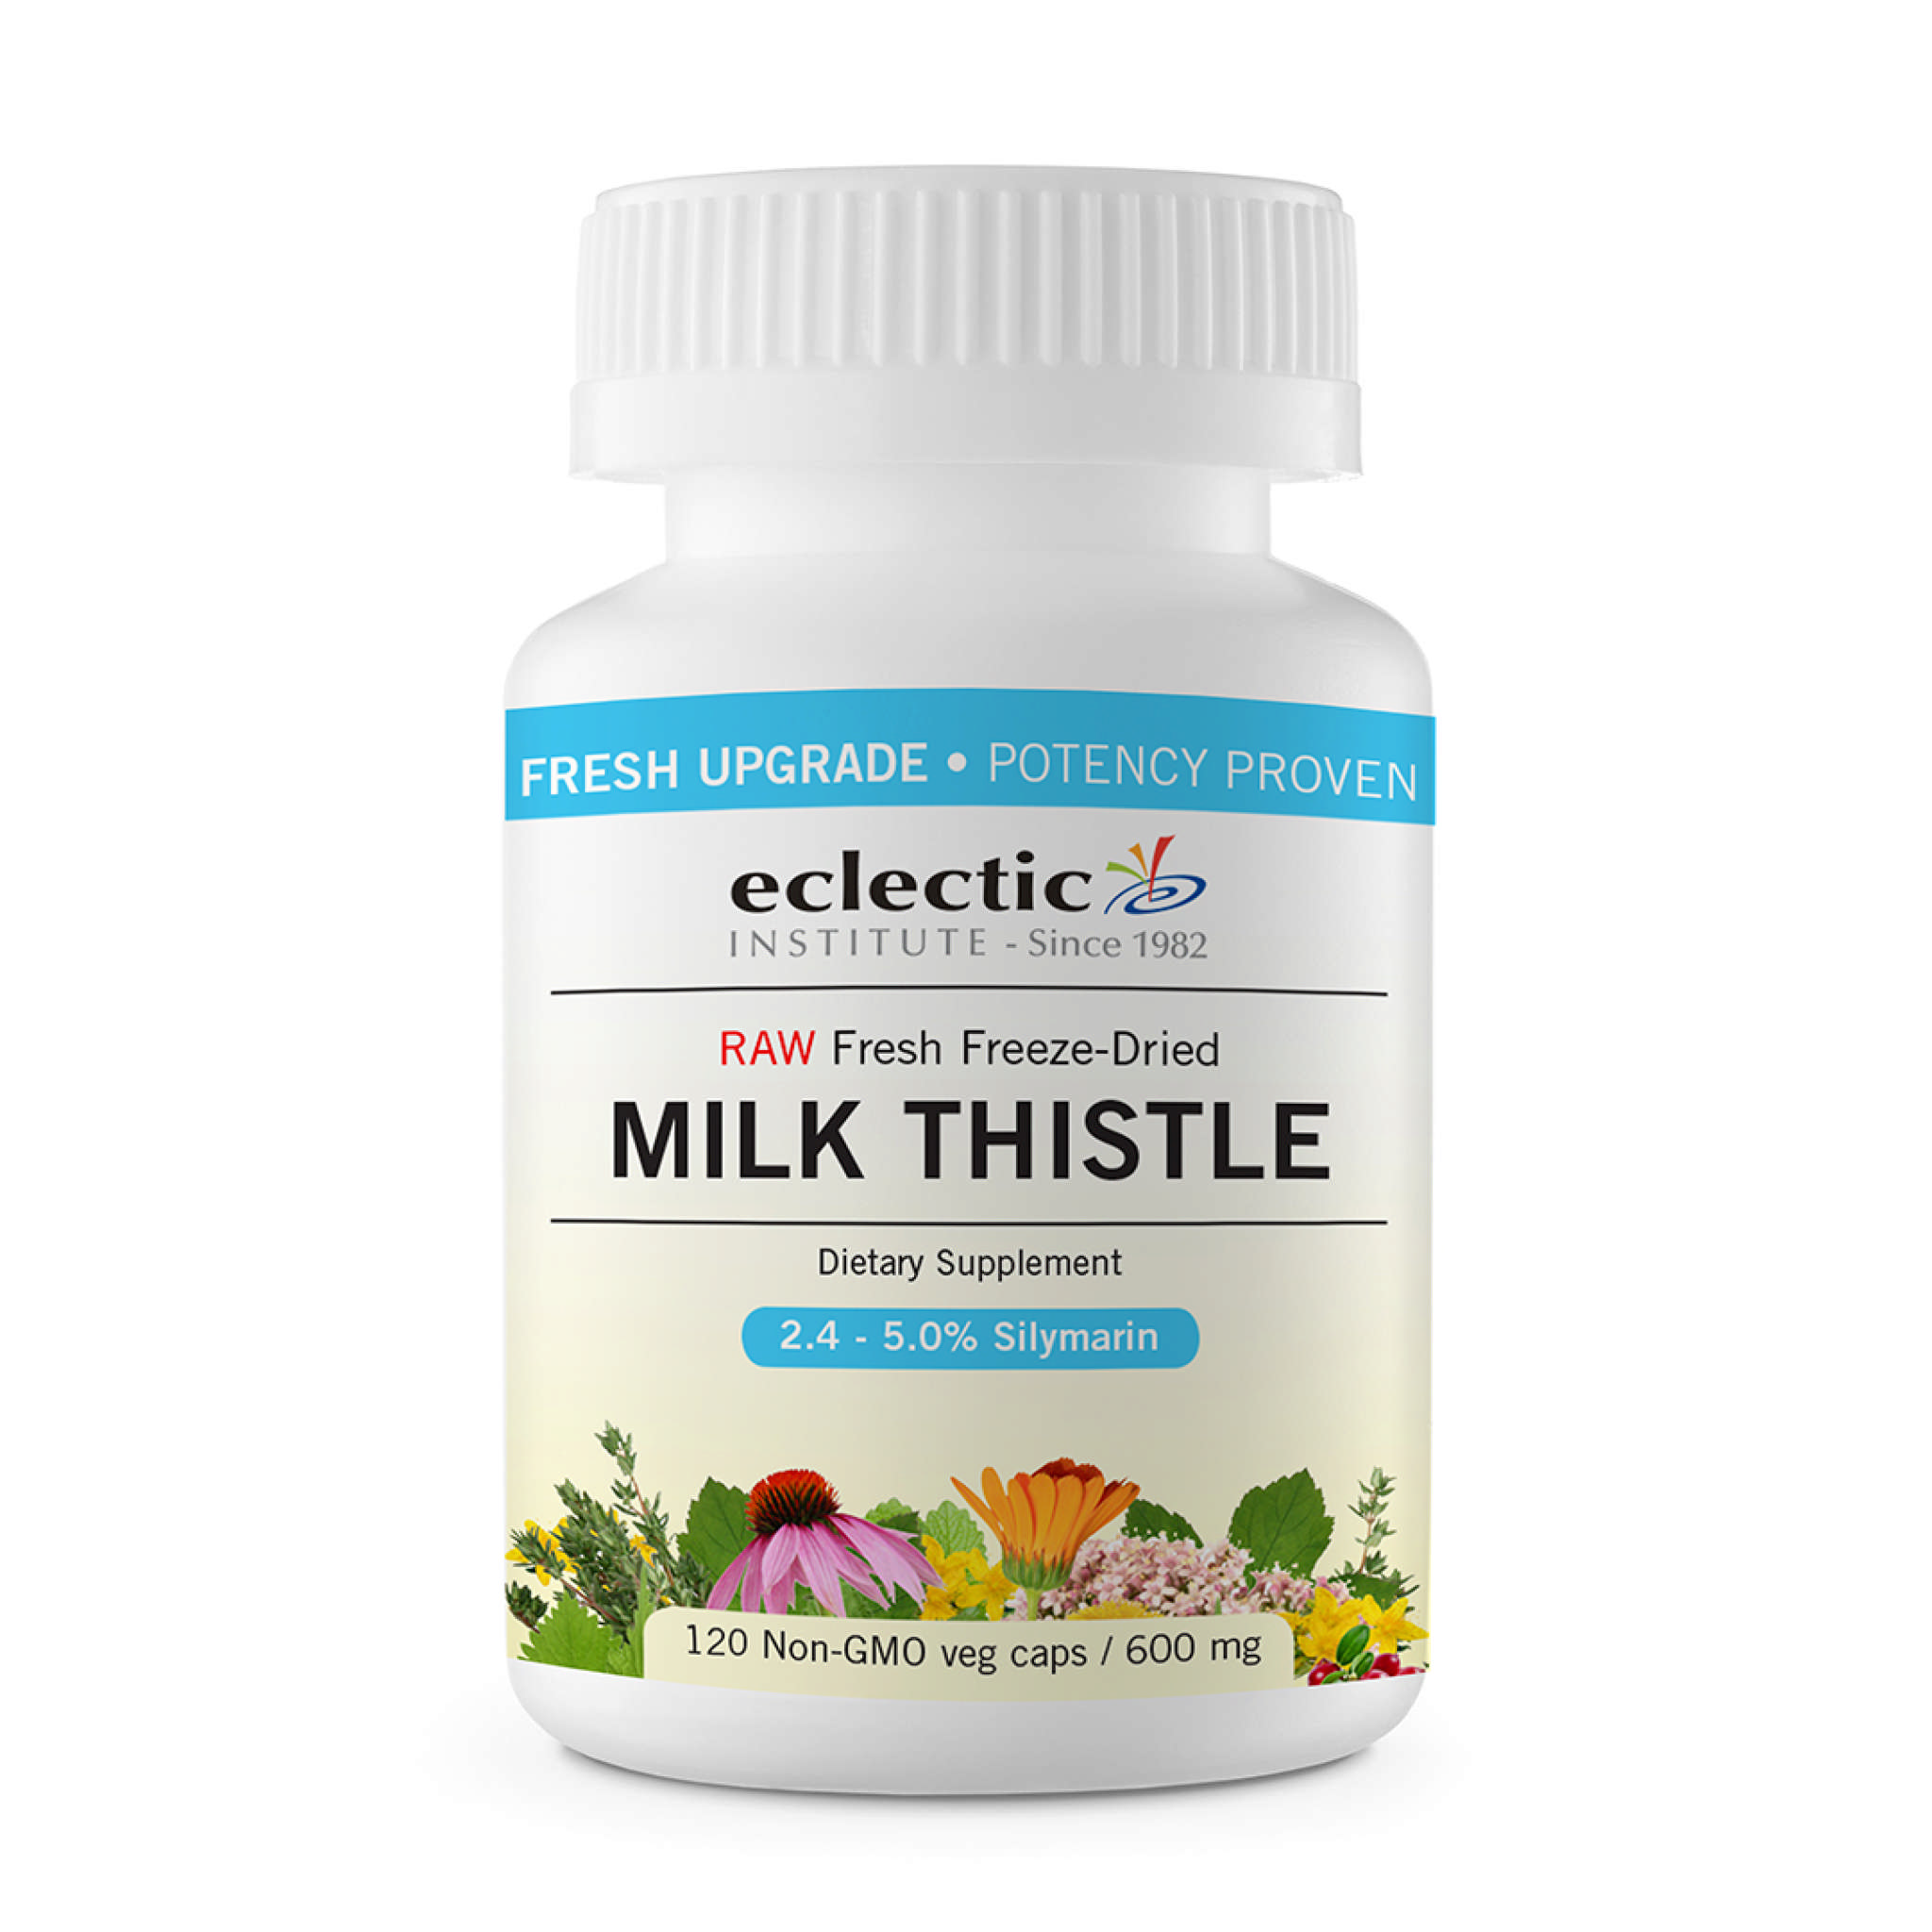 Eclectic Institute - Milk Thistle 600 mg Frz Dried